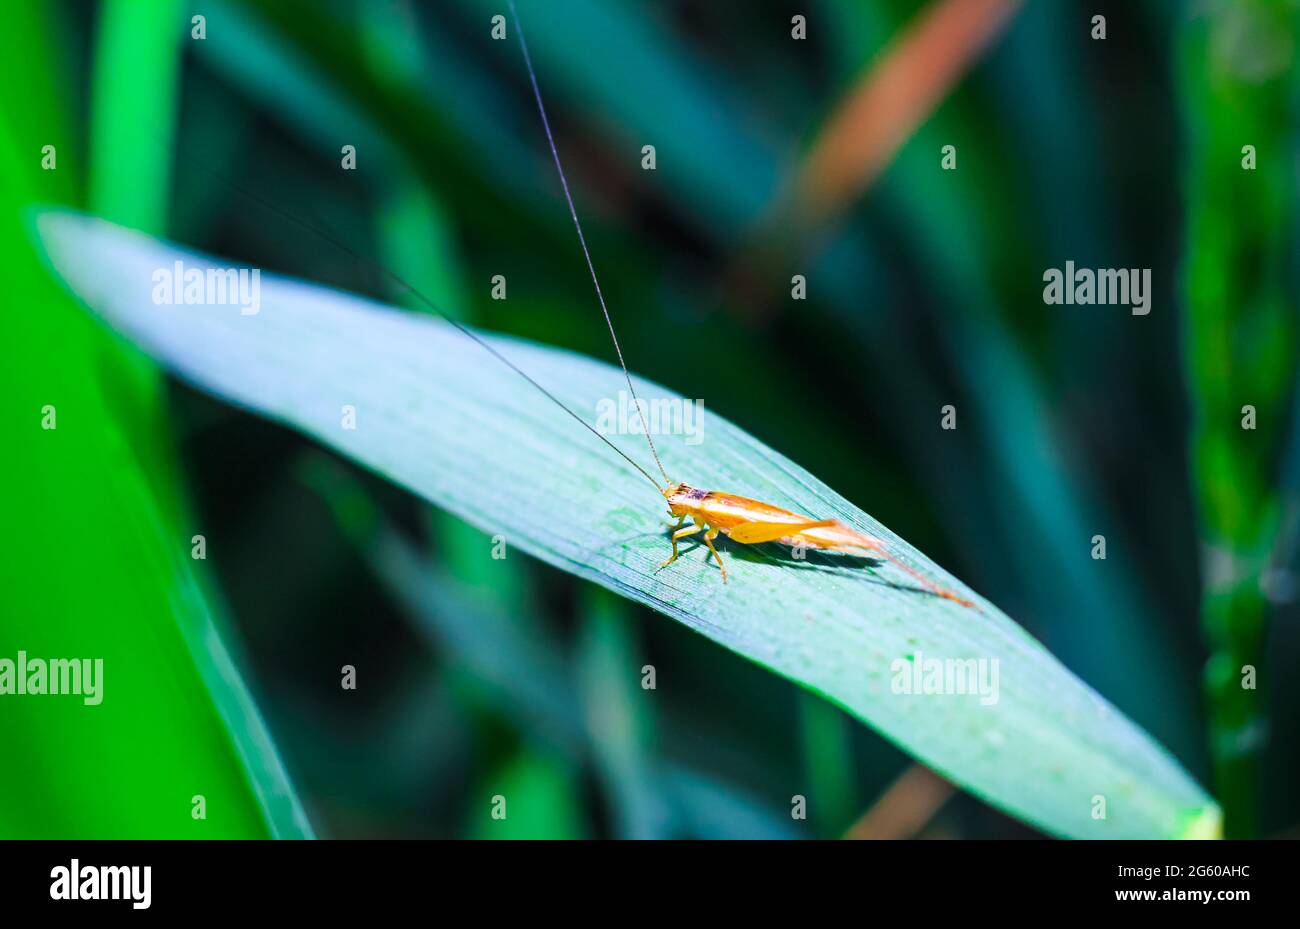 Beautiful grasshopper on the grass on a blurred background. Grasshopper macro view. Grasshopper profile. Stock Photo